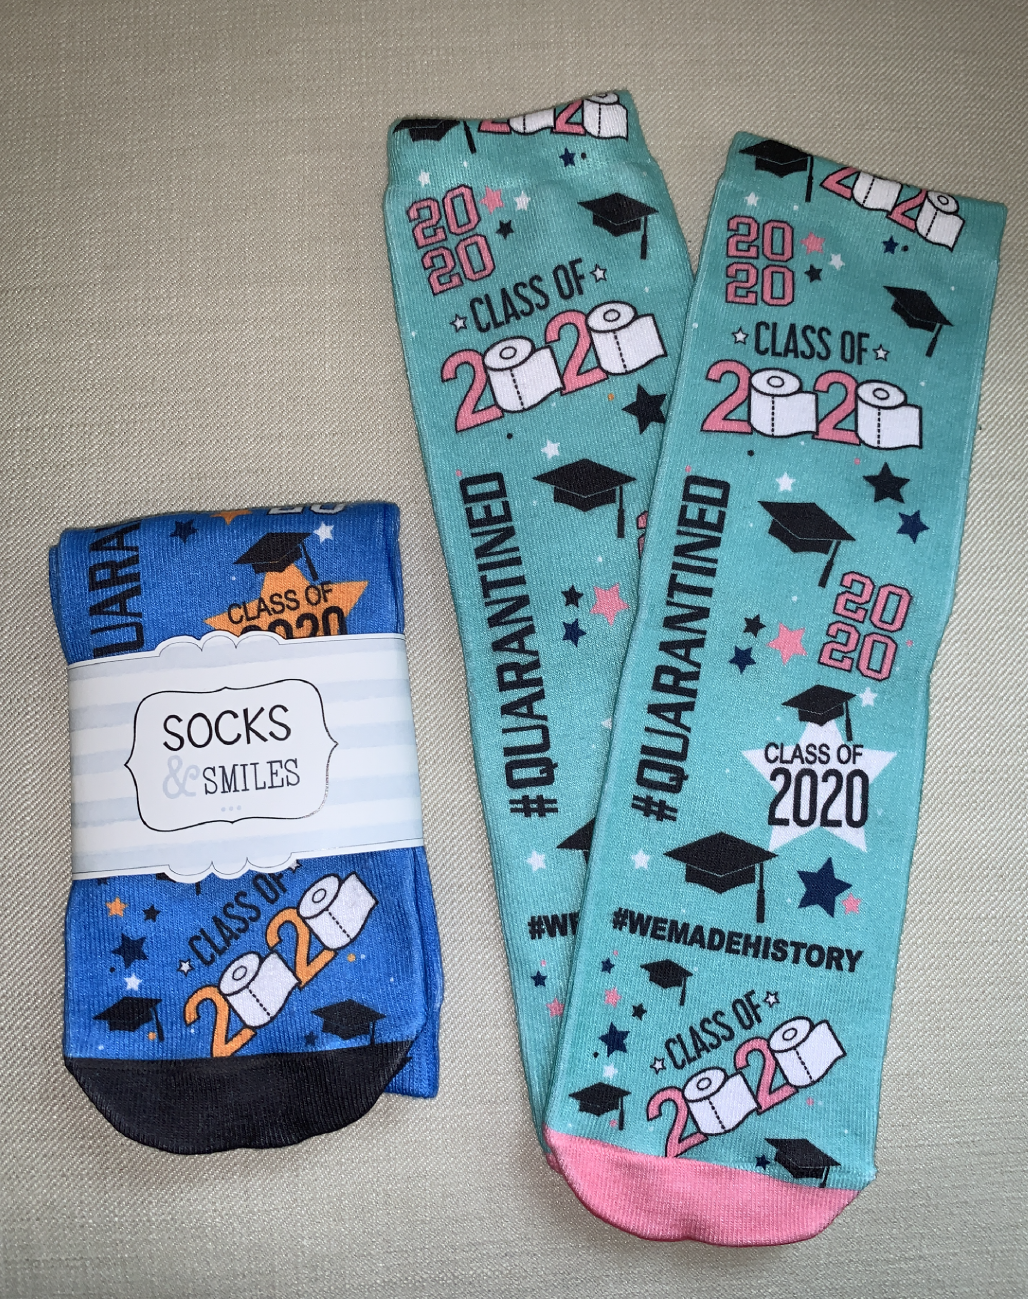 2020 Grad Socks made with sublimation printing